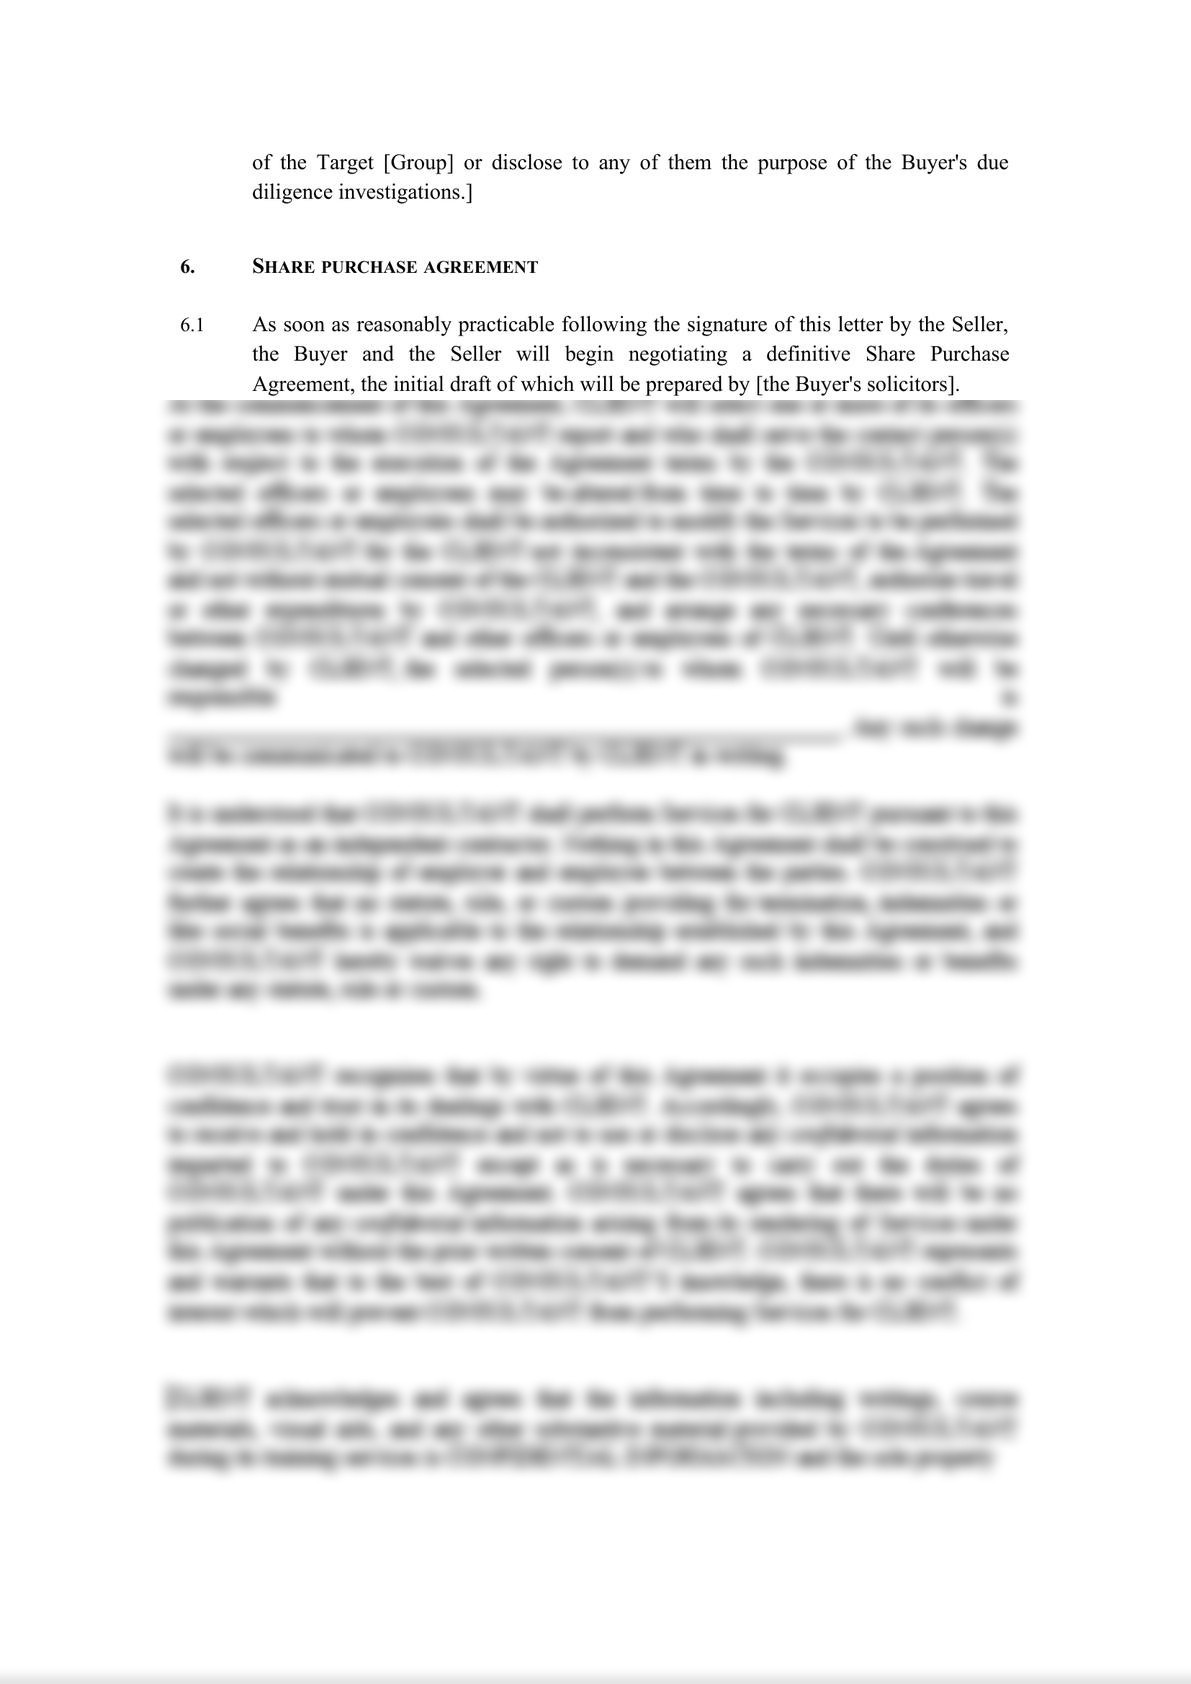 Letter of Intent-International Acquisition (M&A)-5